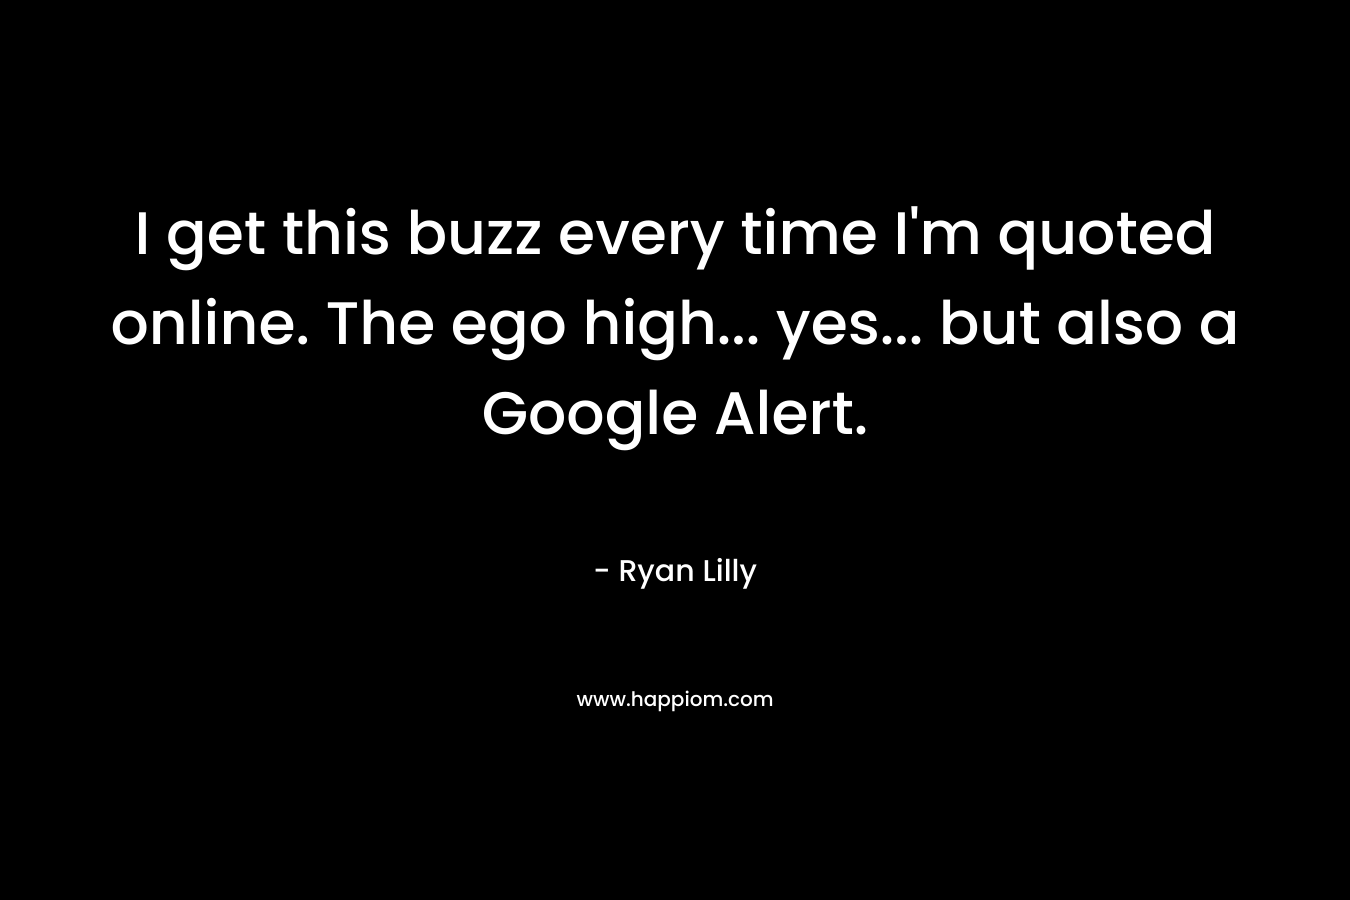 I get this buzz every time I'm quoted online. The ego high... yes... but also a Google Alert.